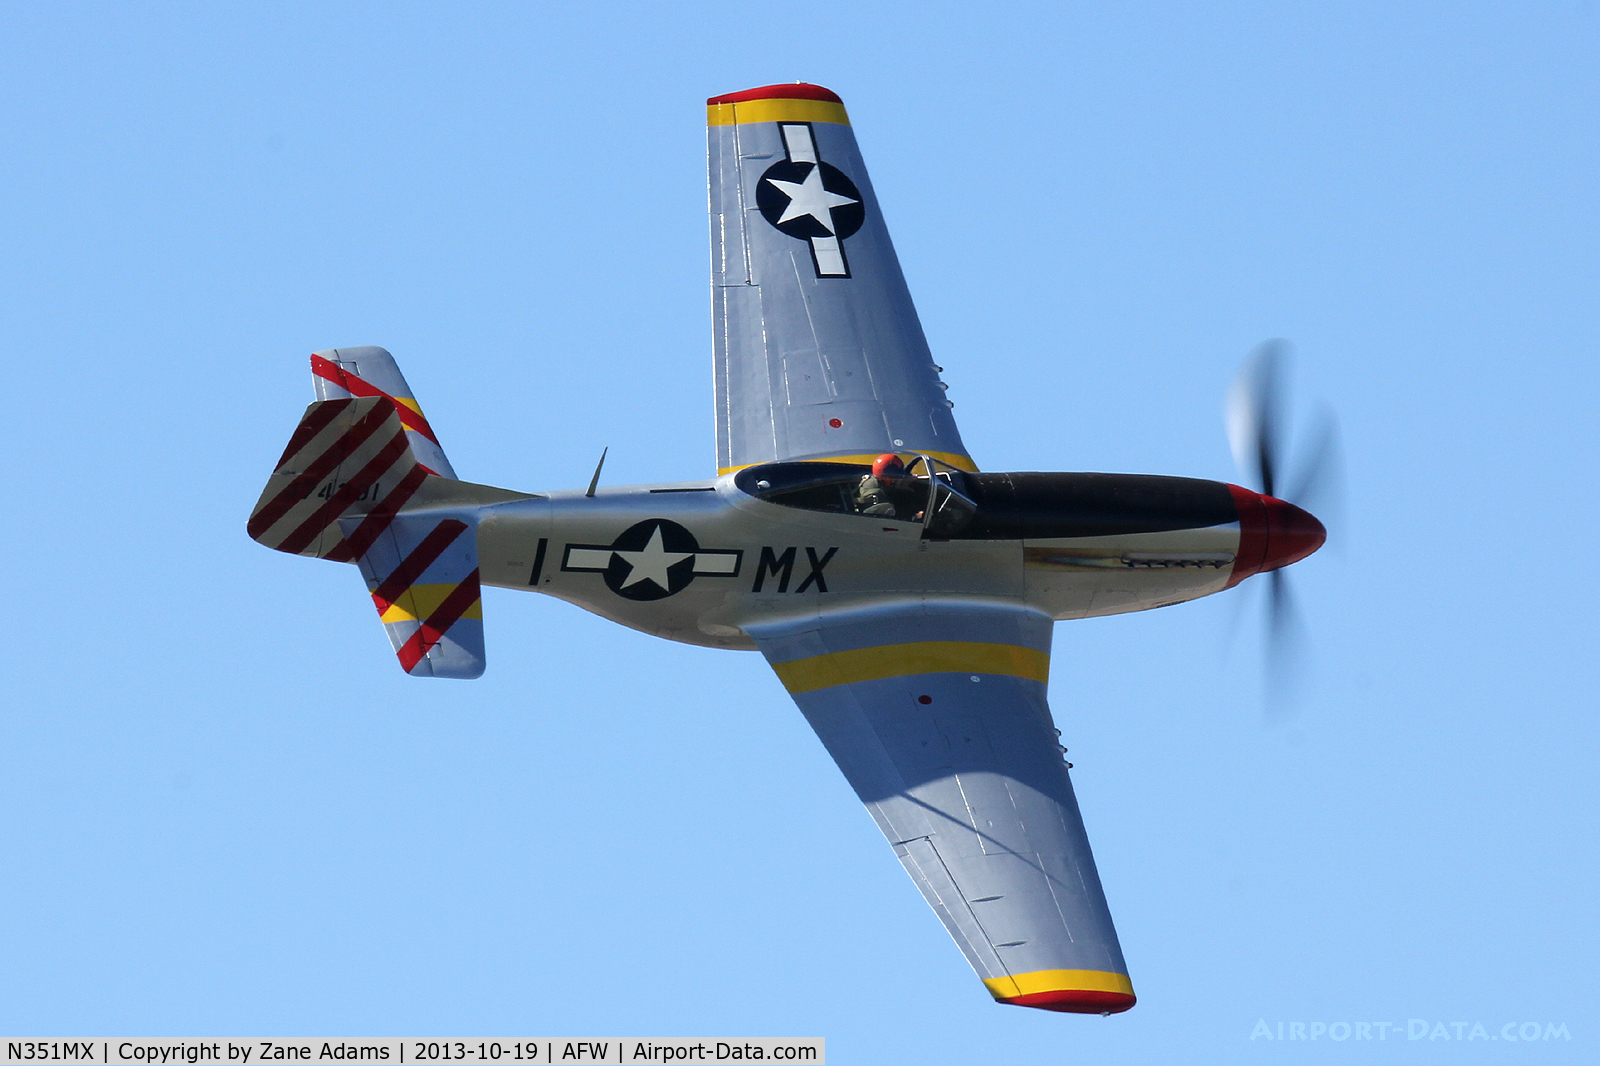 N351MX, 1944 North American P-51D Mustang C/N 122-40931 (44-74391), At the 2013 Alliance Airshow - Fort Worth, TX